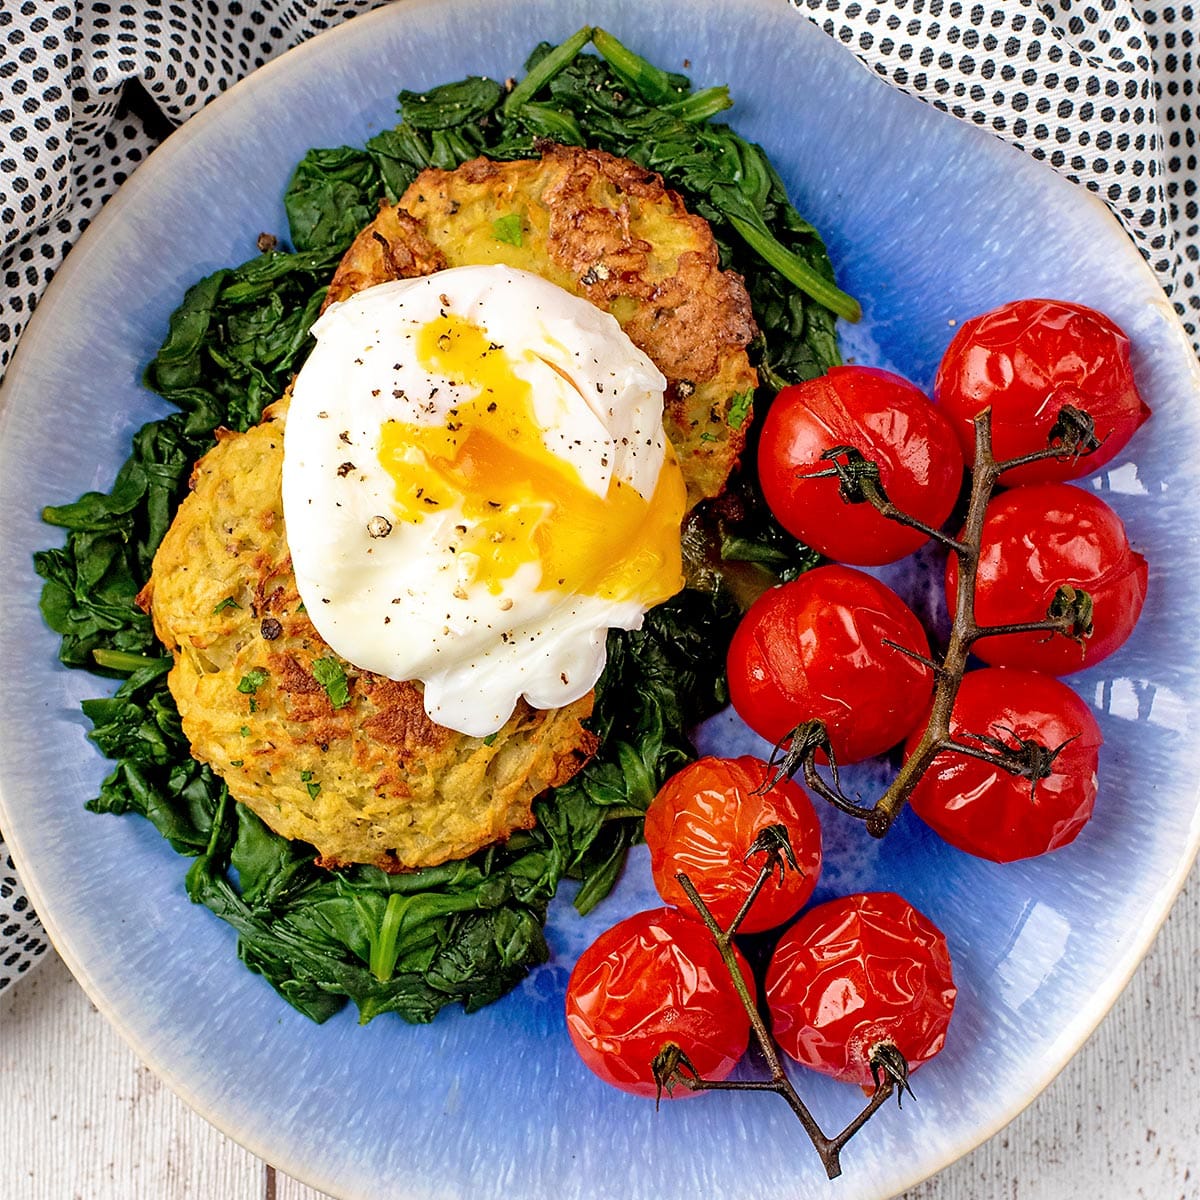 https://hungryhealthyhappy.com/wp-content/uploads/2018/10/Oven-Baked-Hash-Browns-featured-b.jpg